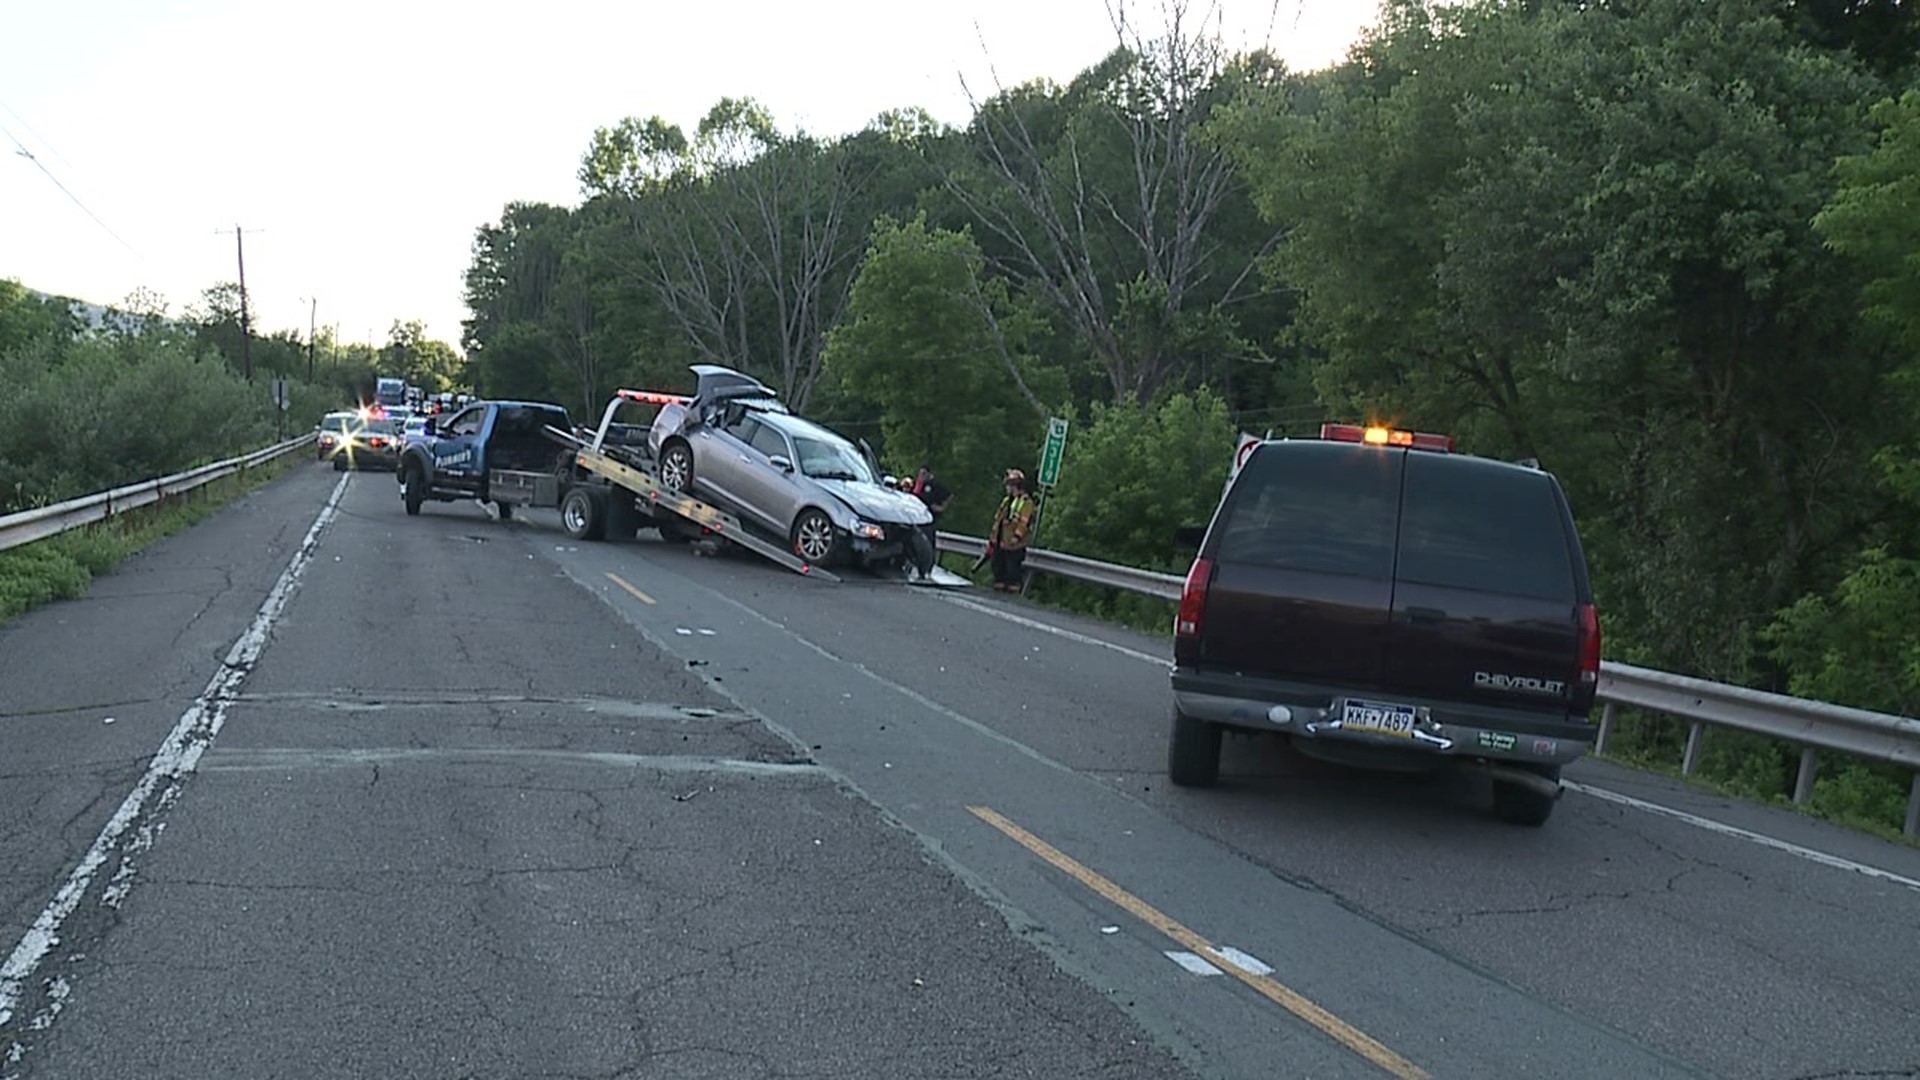 A wreck sent two people to the hospital. State police said one person was thrown from their car along Route 6 near Factoryville.